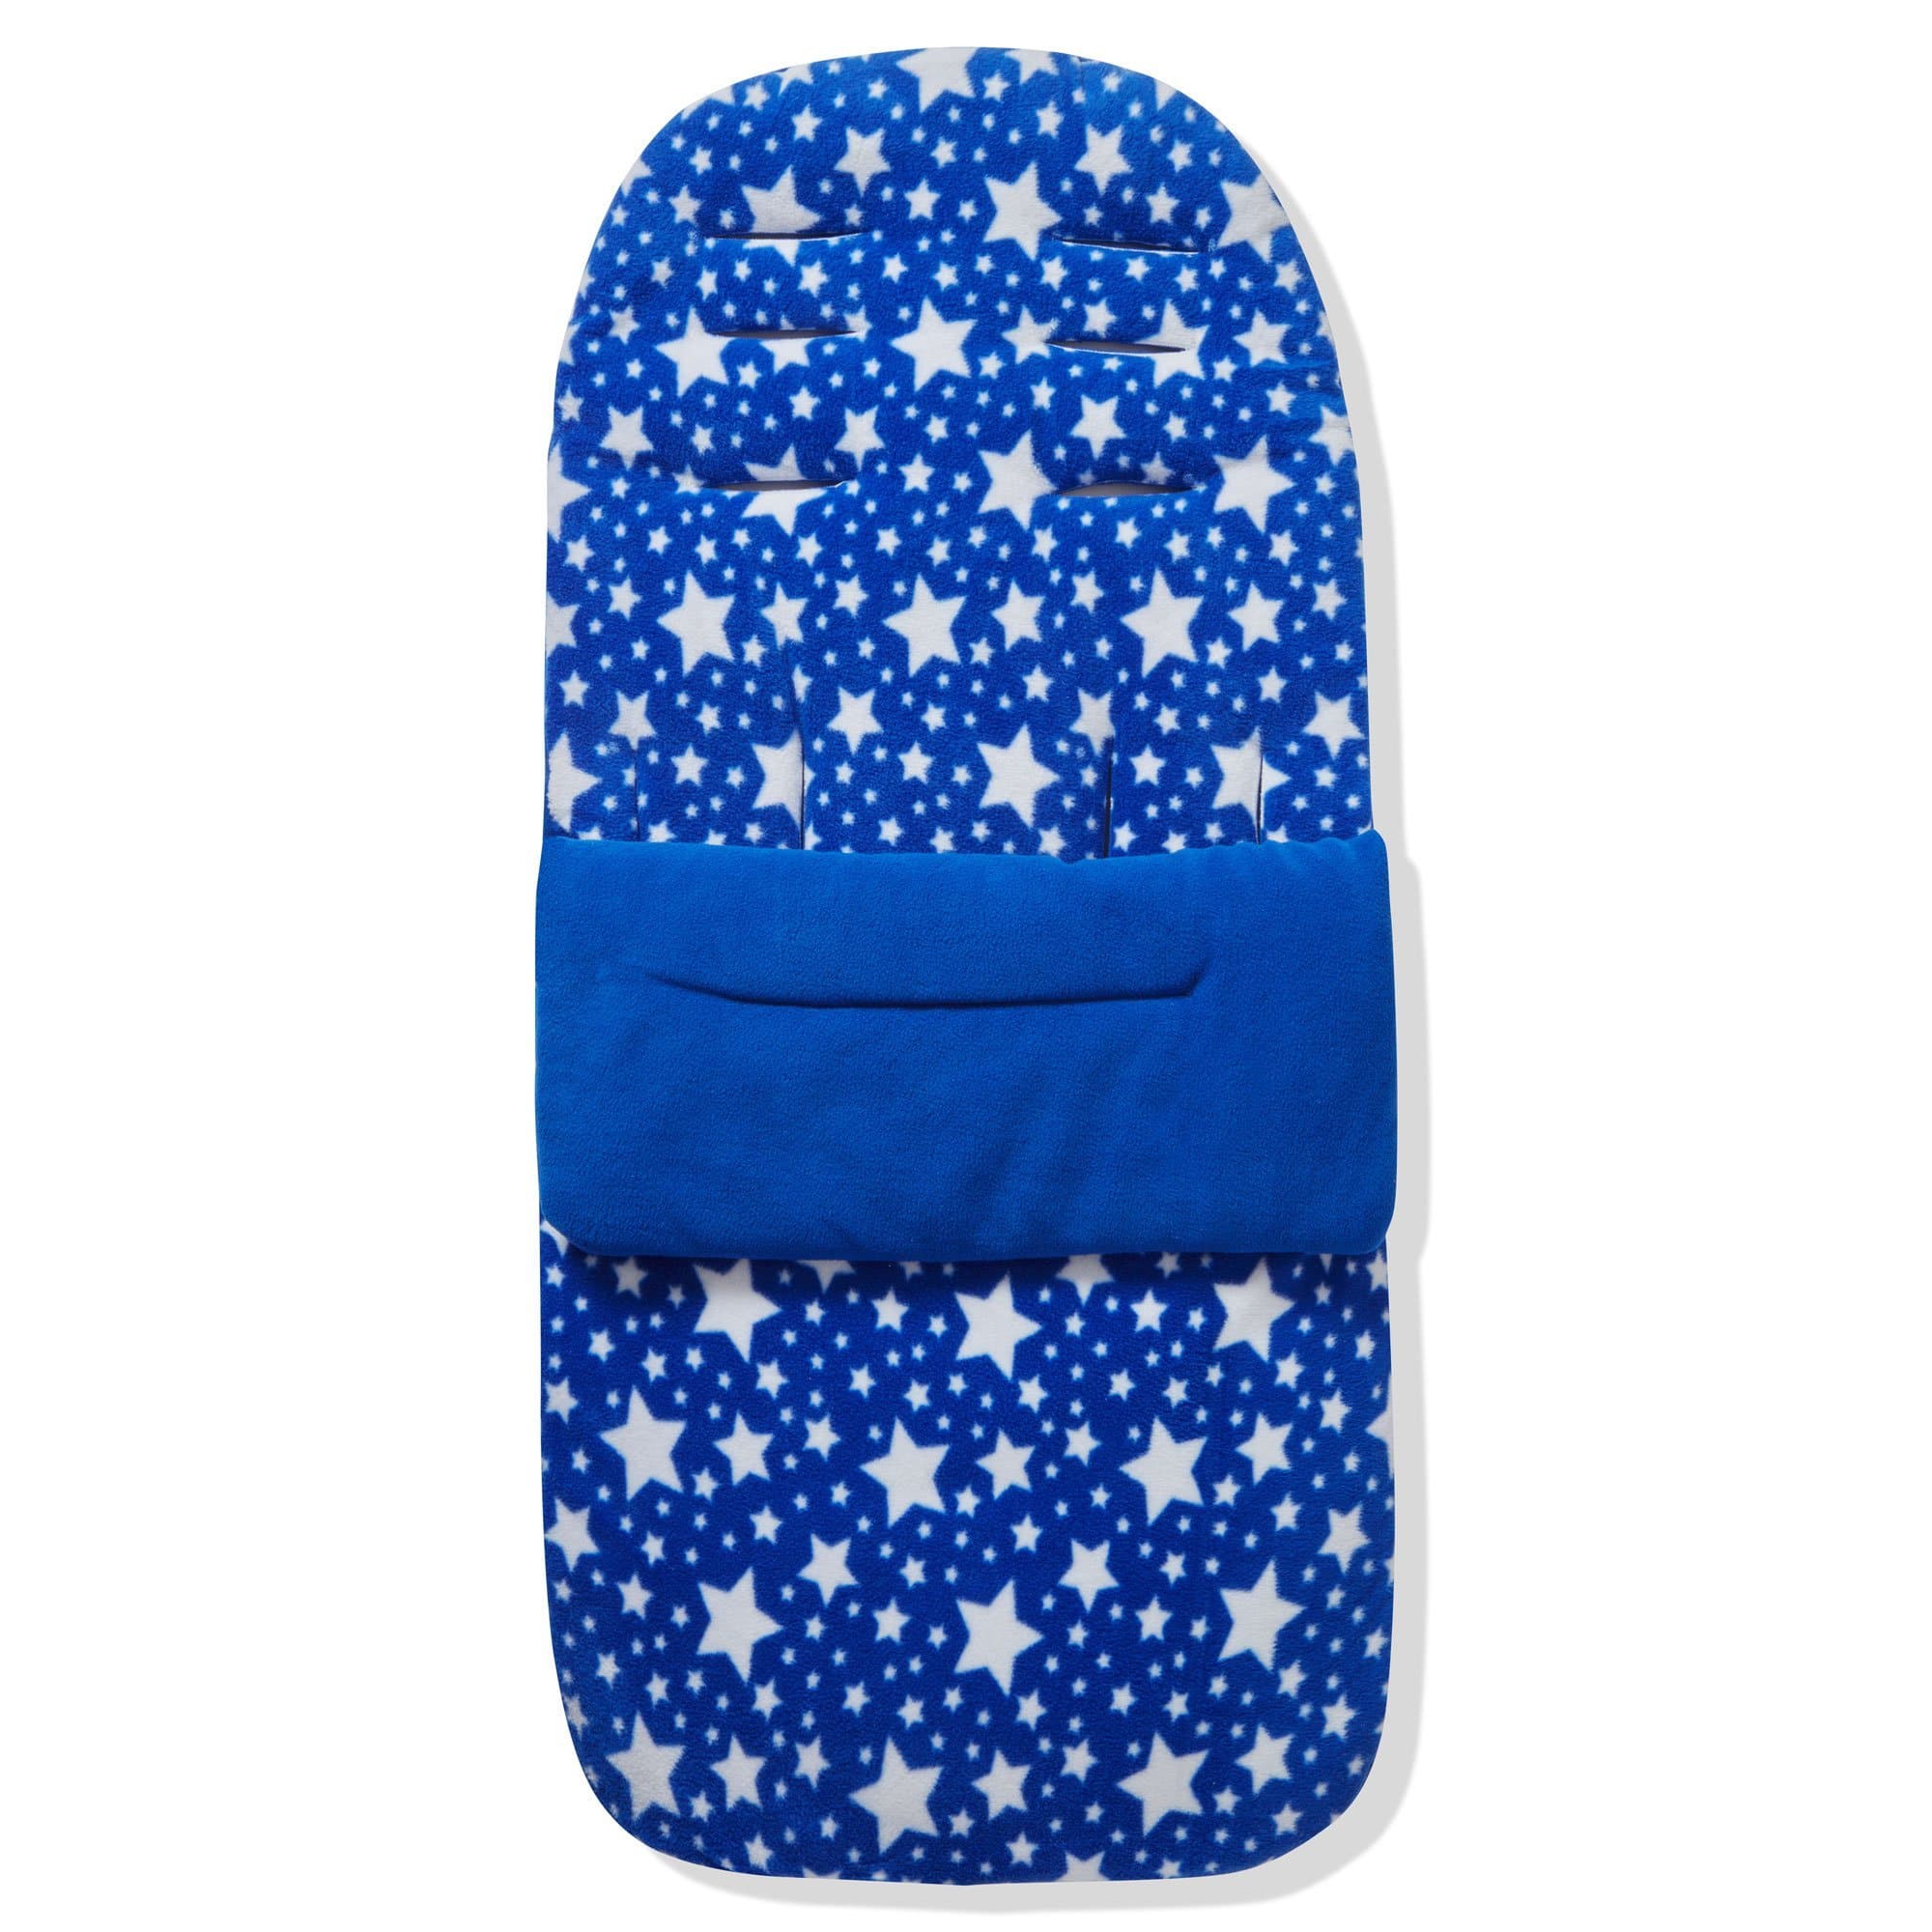 Fleece Footmuff / Cosy Toes Compatible with Bebe 9 - Blue Star / Fits All Models | For Your Little One